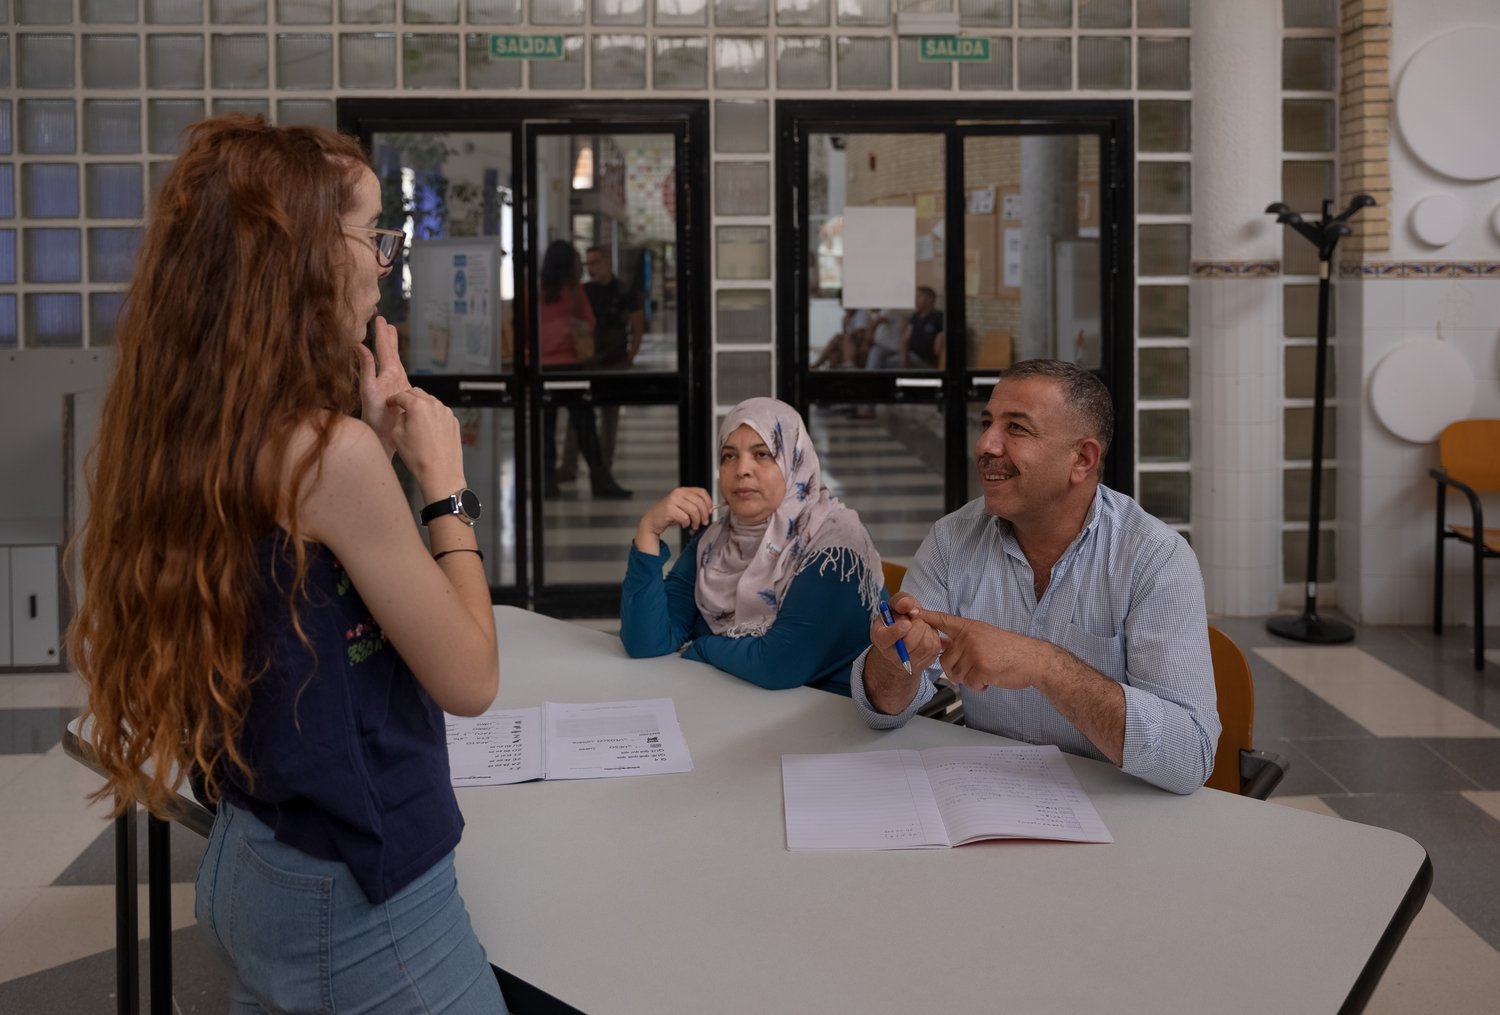 A couple seated at a table interact with their teacher standing in front of them.